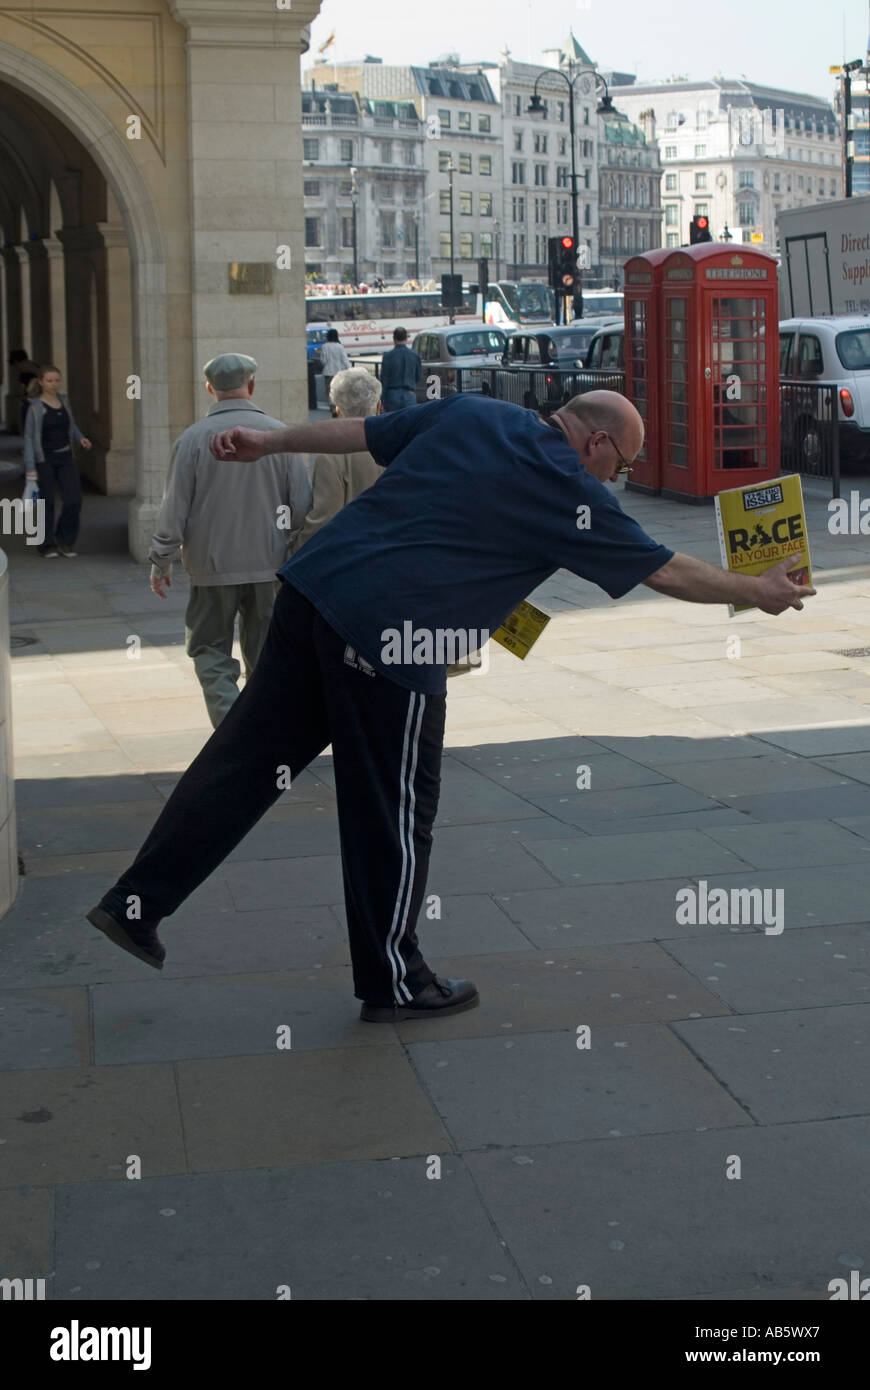 Trafalgar Square Big Issue magazine seller doing a pose to attract attention Stock Photo